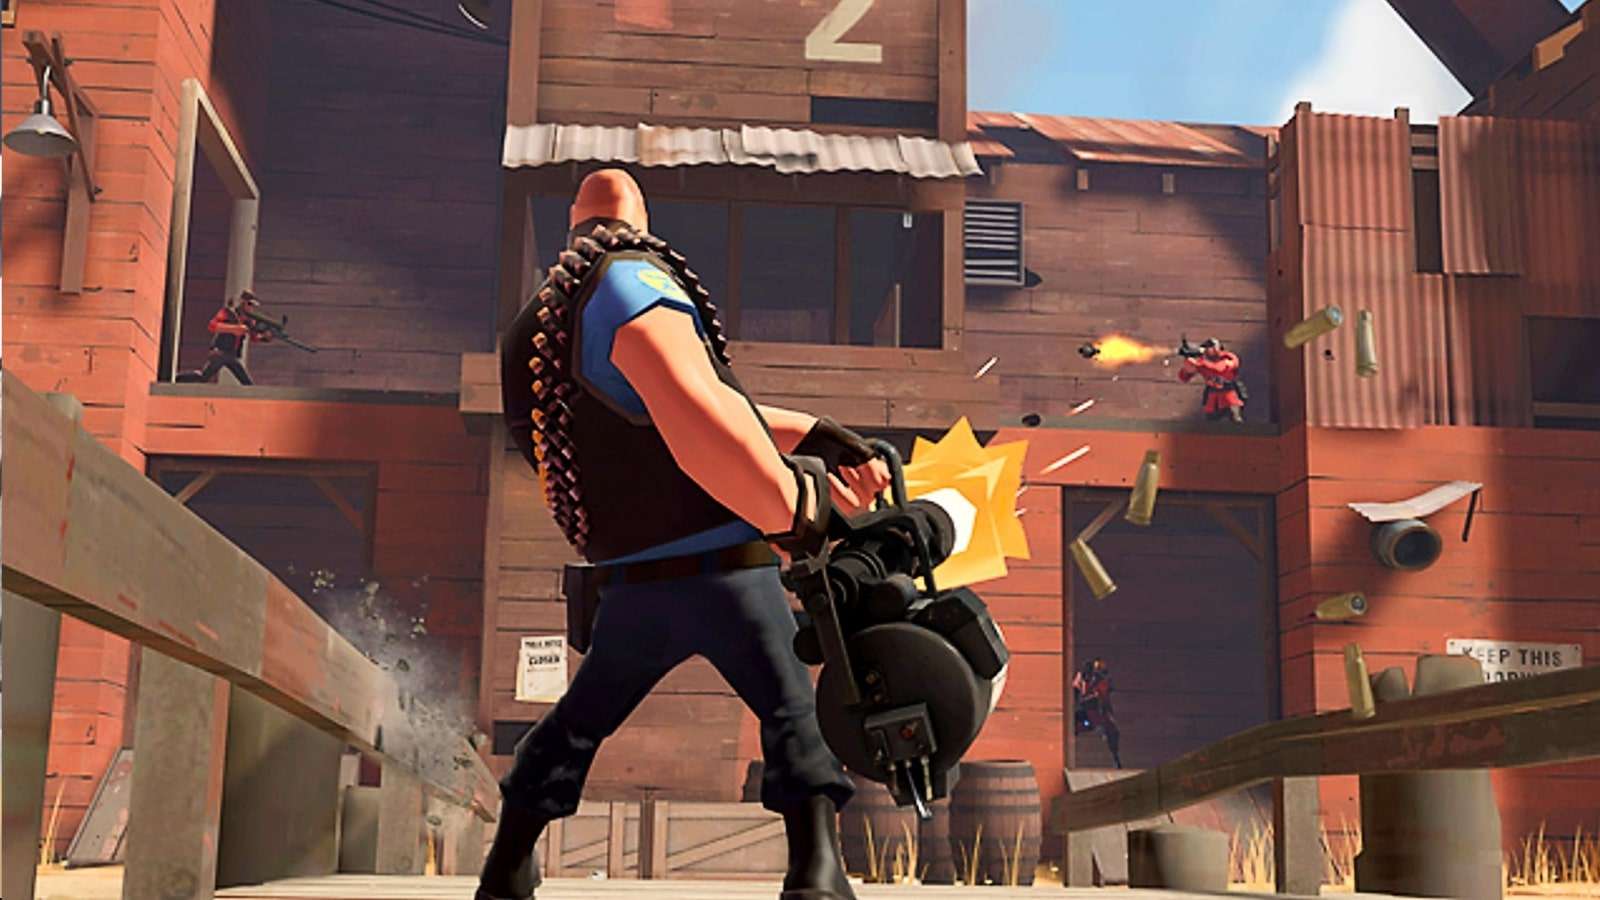 Team Fortress 2 image still feature